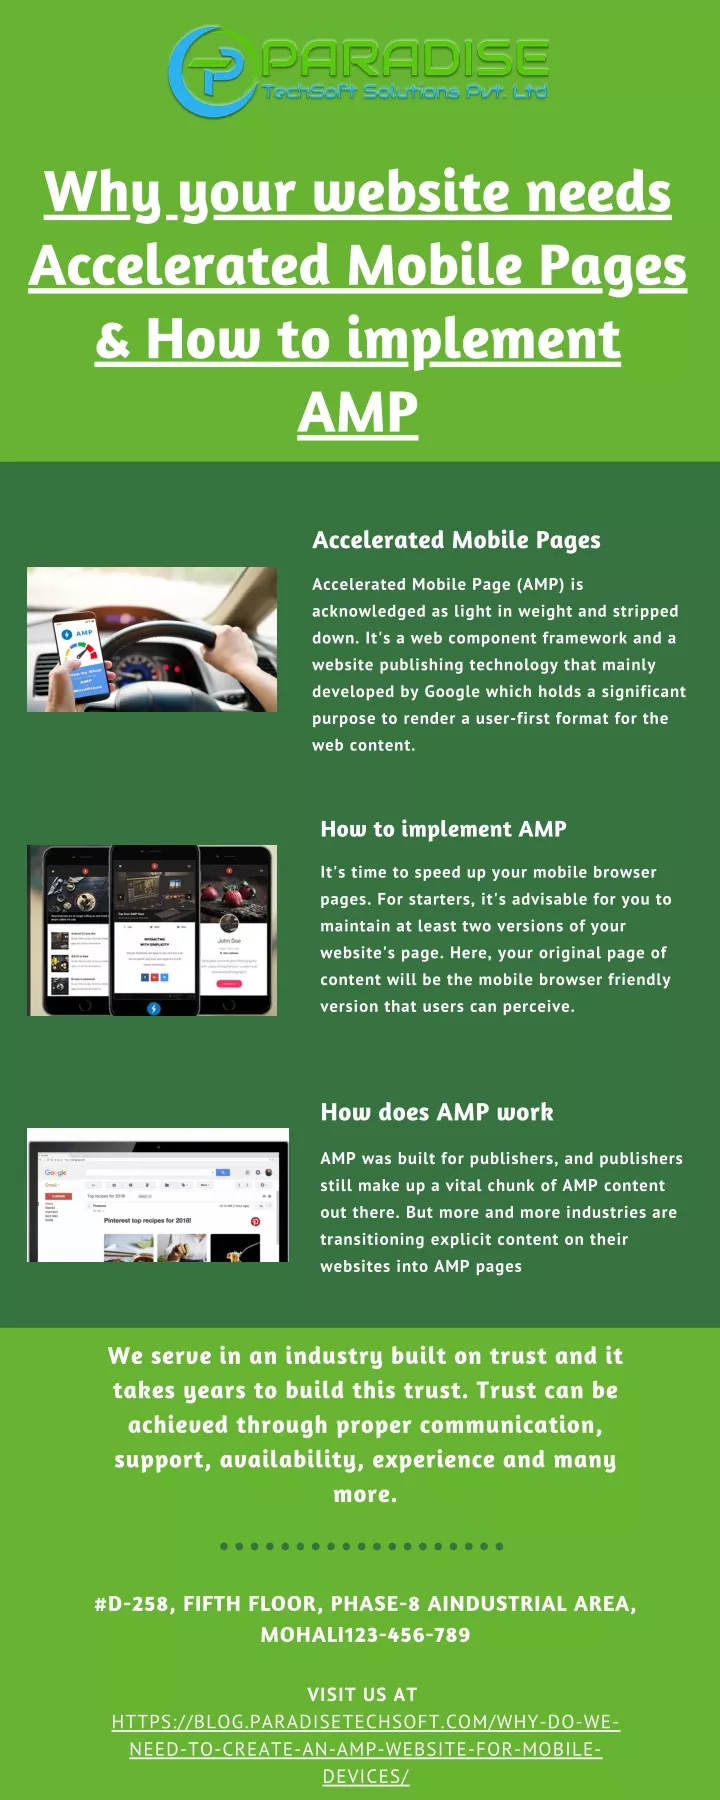 why your website needs accelerated mobile pages